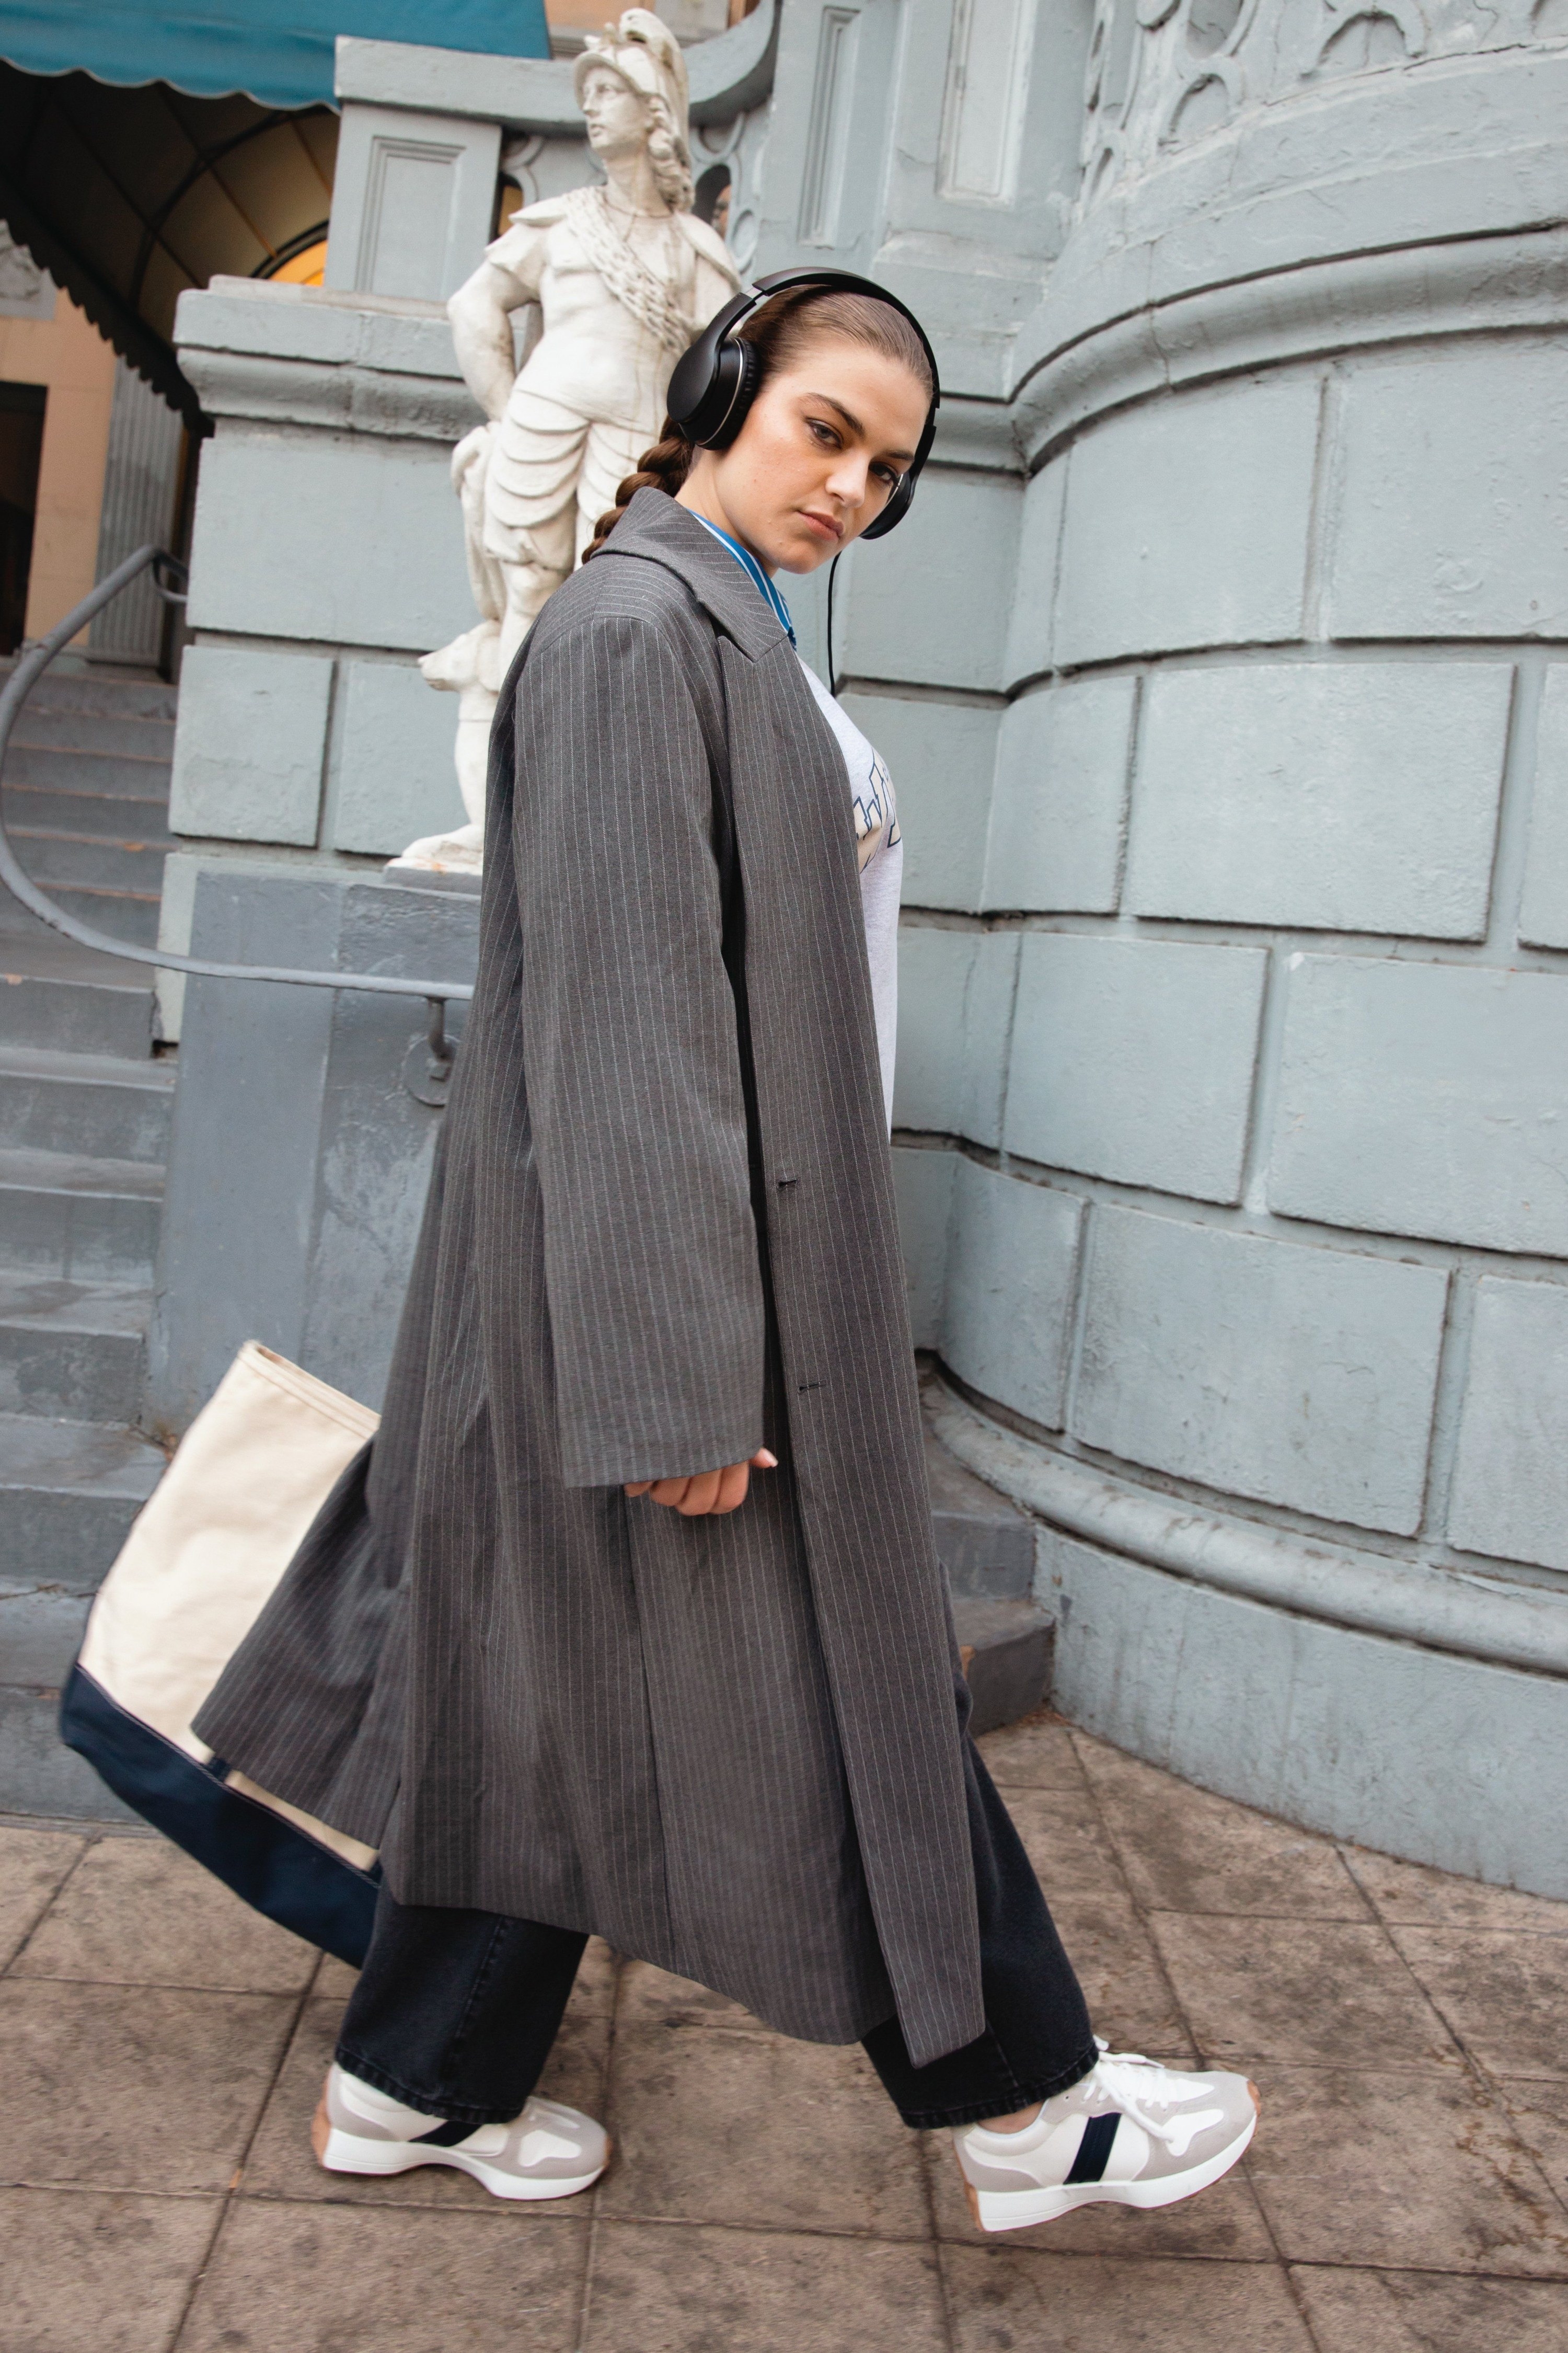 model wearing the trench